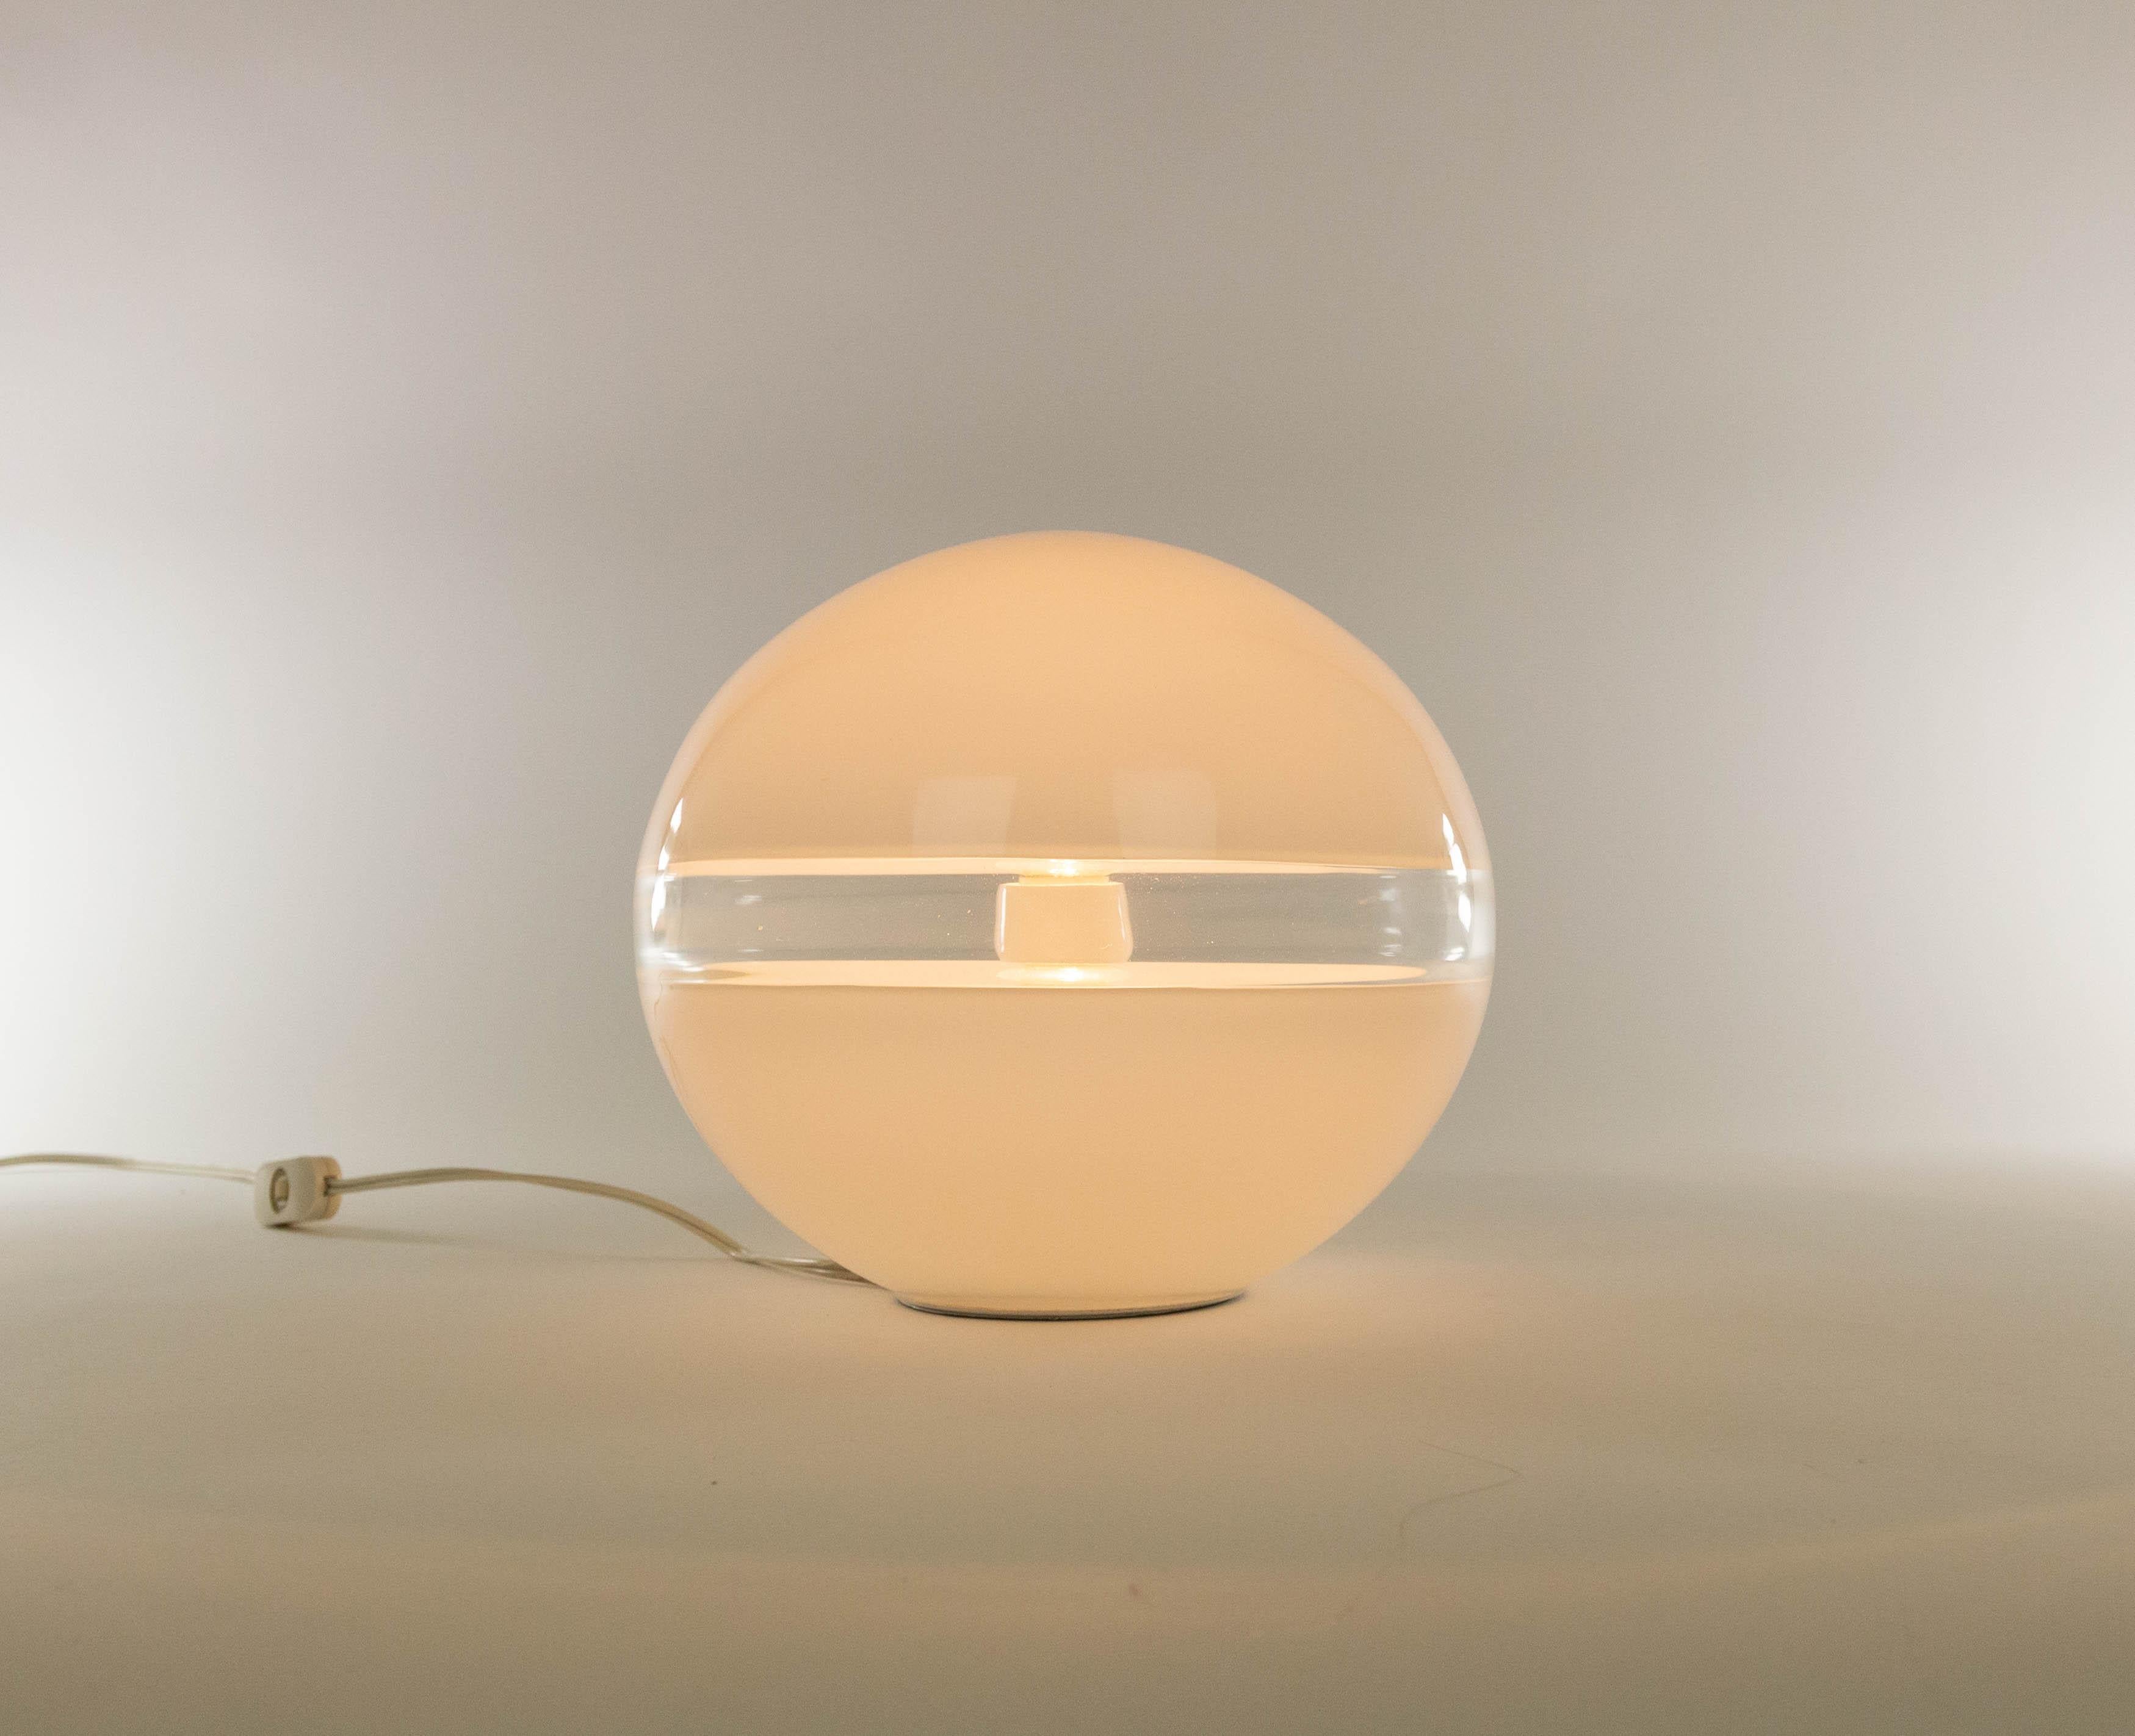 White LT 230 table lamp designed by Carlo Nason and manufactured in the 1960s by Murano glassmaker A.V. Mazzega. The lamp is made of white Murano glass and has a transparant crystal band.

This model was produced in two sizes; this is the smaller